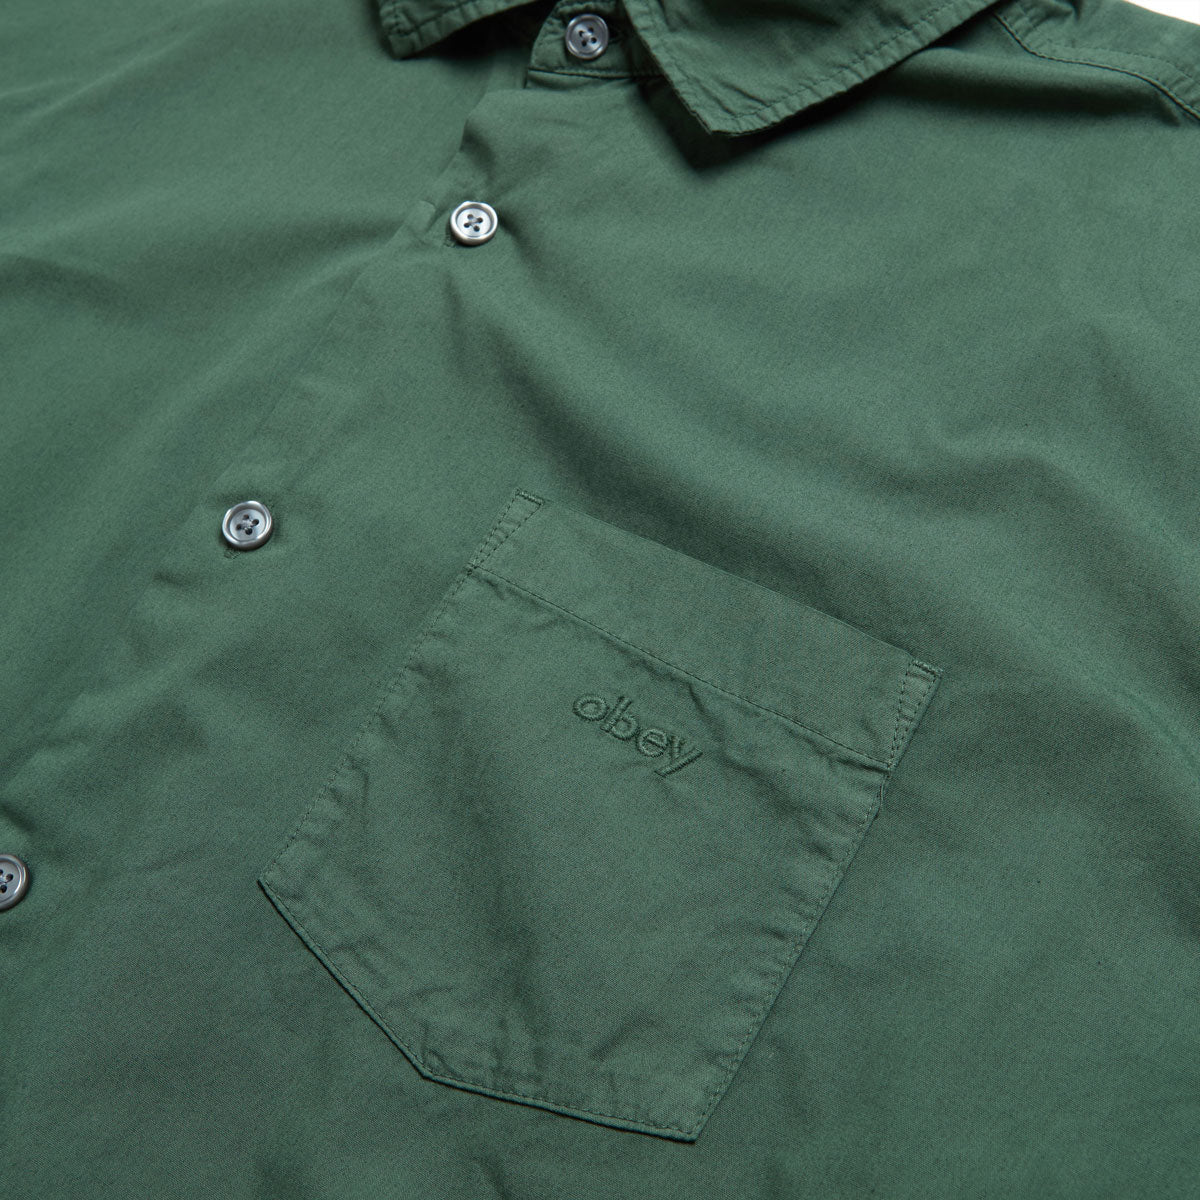 Obey Pigment Sully Woven Shirt - Pigment Laurel Wreath image 3